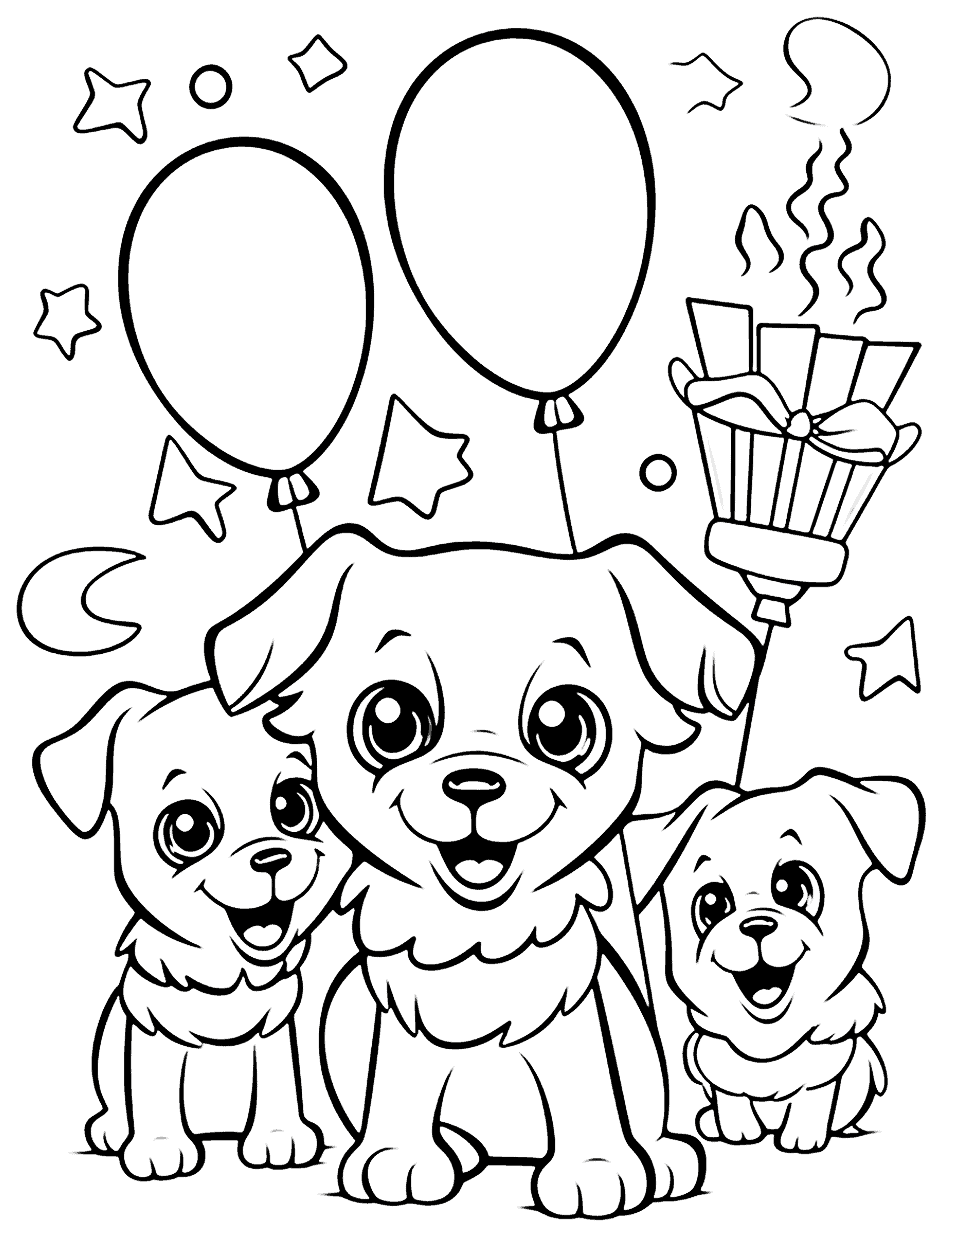 Puppy's Paw-ty Birthday Happy Coloring Page - A playful puppy celebrating its birthday with other dog friends, surrounded by balloons.